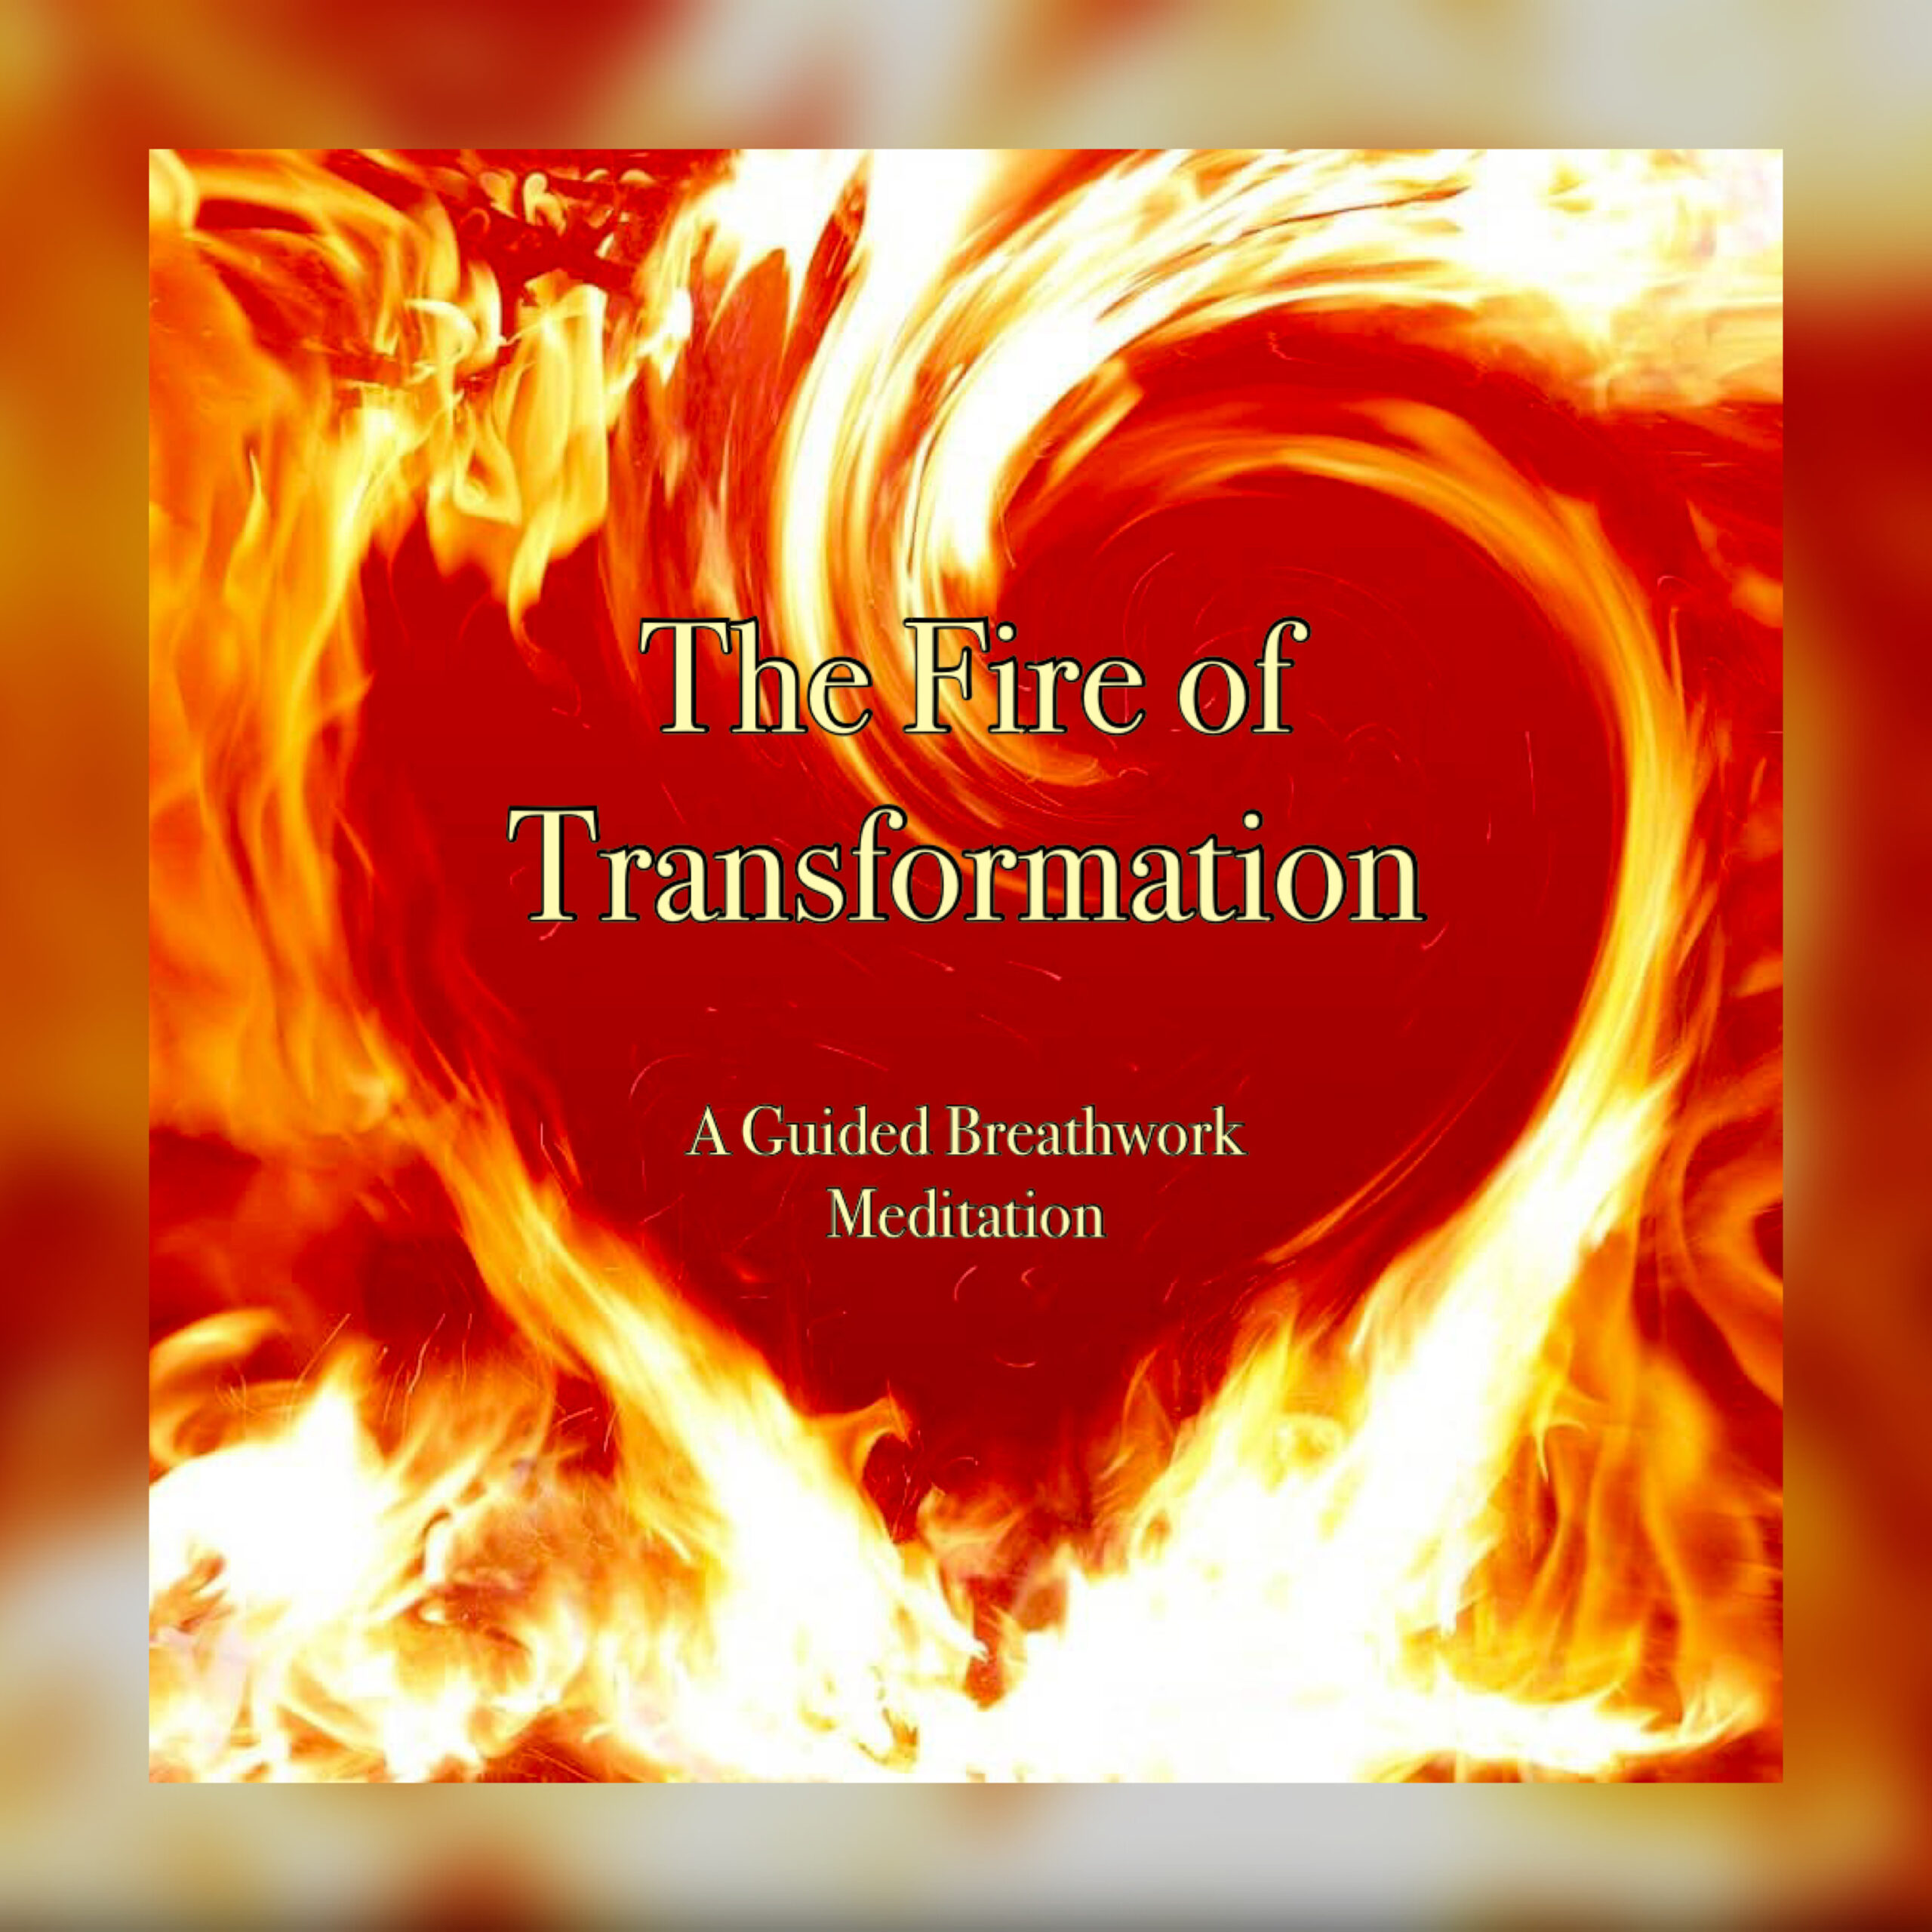 The Fire of Transformation